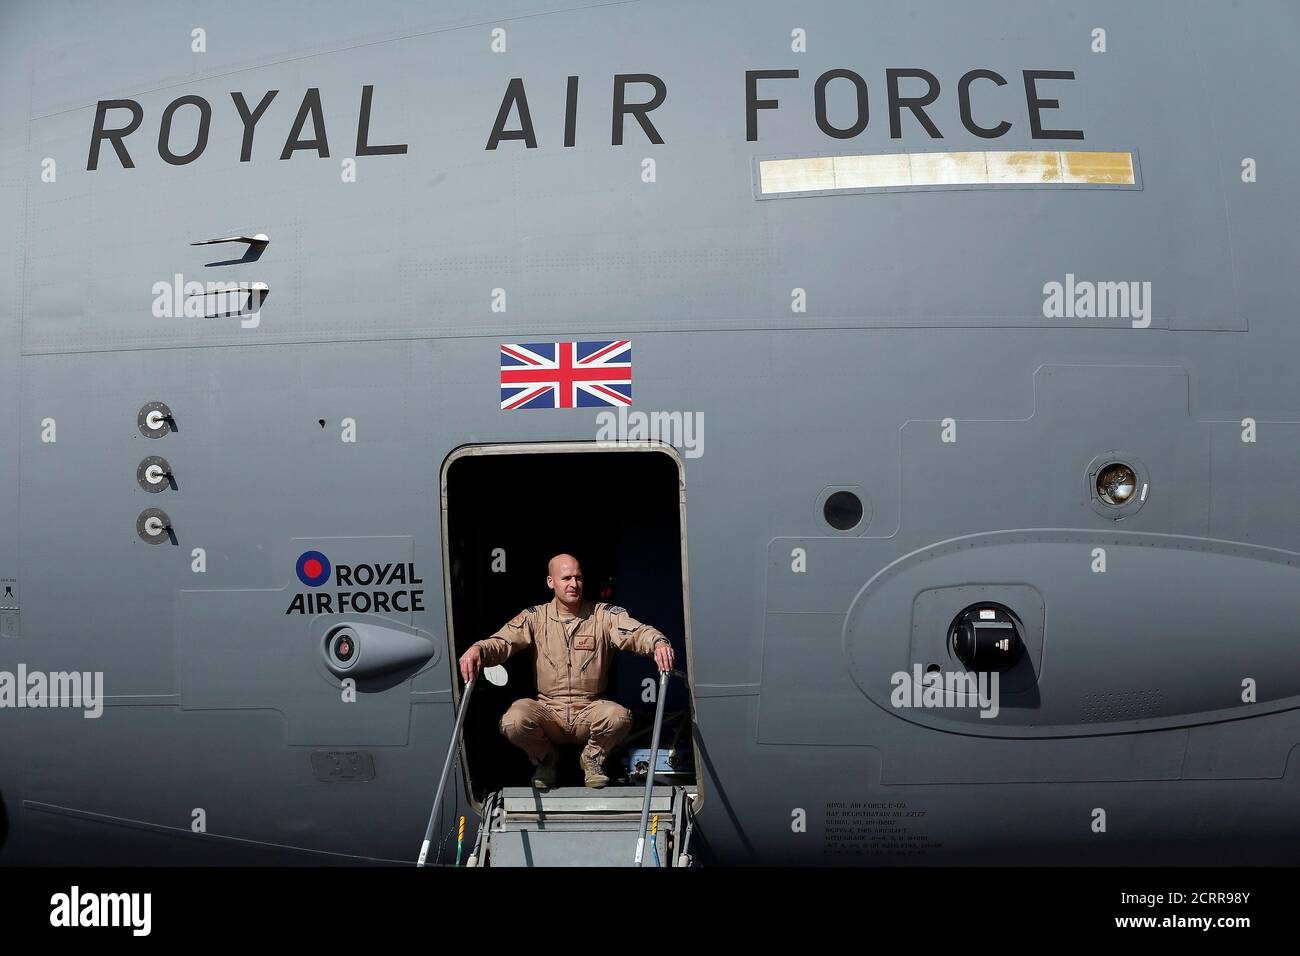 A British soldier looks out from a Royal Airforce  C-17 Globemaster III aircraft at a Kandahar airfield, Afghanistan December 20, 2012. REUTERS/Stefan Wermuth (AFGHANISTAN - Tags: TRANSPORT MILITARY CONFLICT) Stock Photo